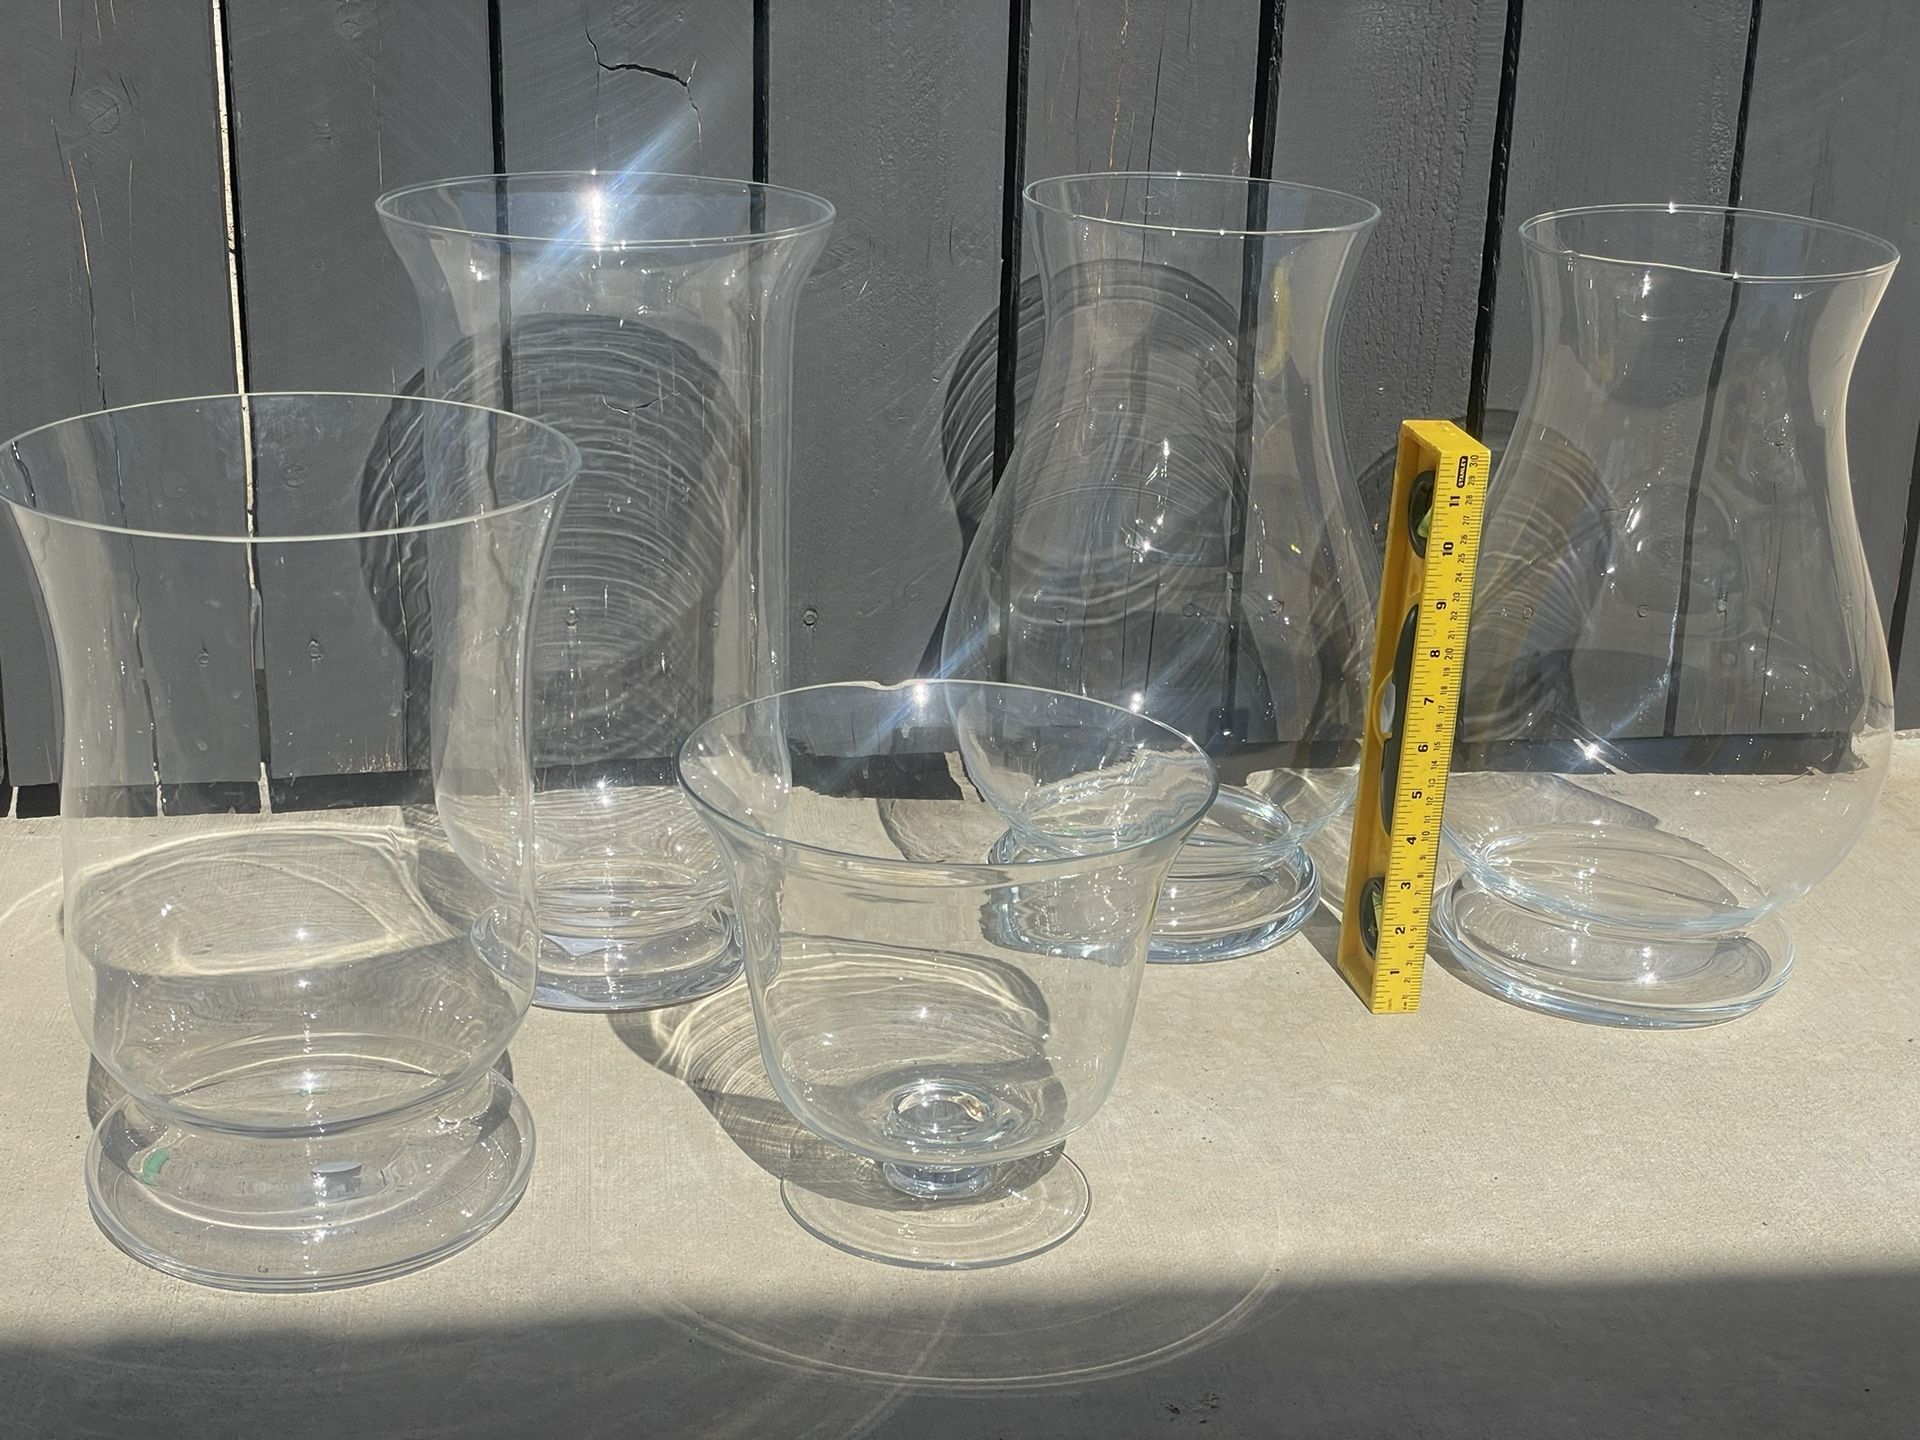 5 Clear Vases